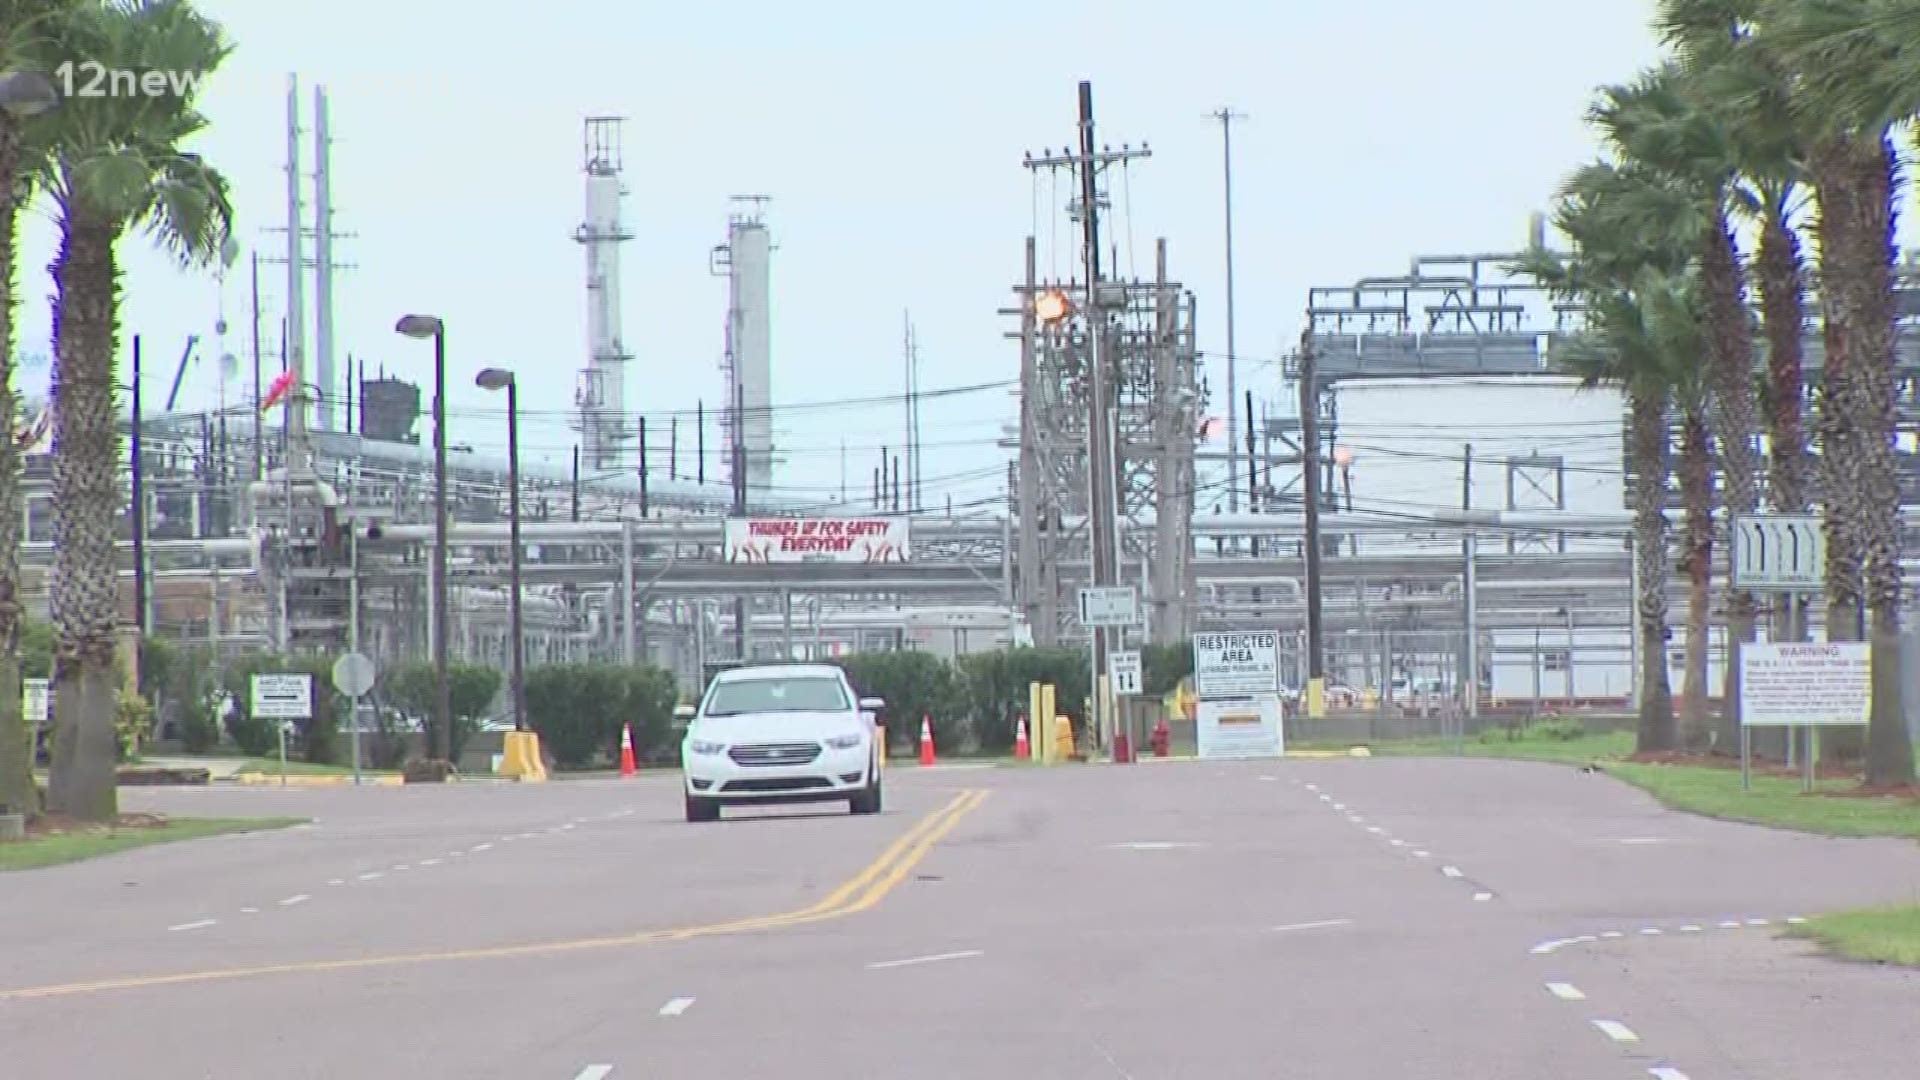 A Motiva employee is in the hospital today because of an equipment fire at the Port Arthur refinery that started around 6 a.m. Crews contained the fire quickly.